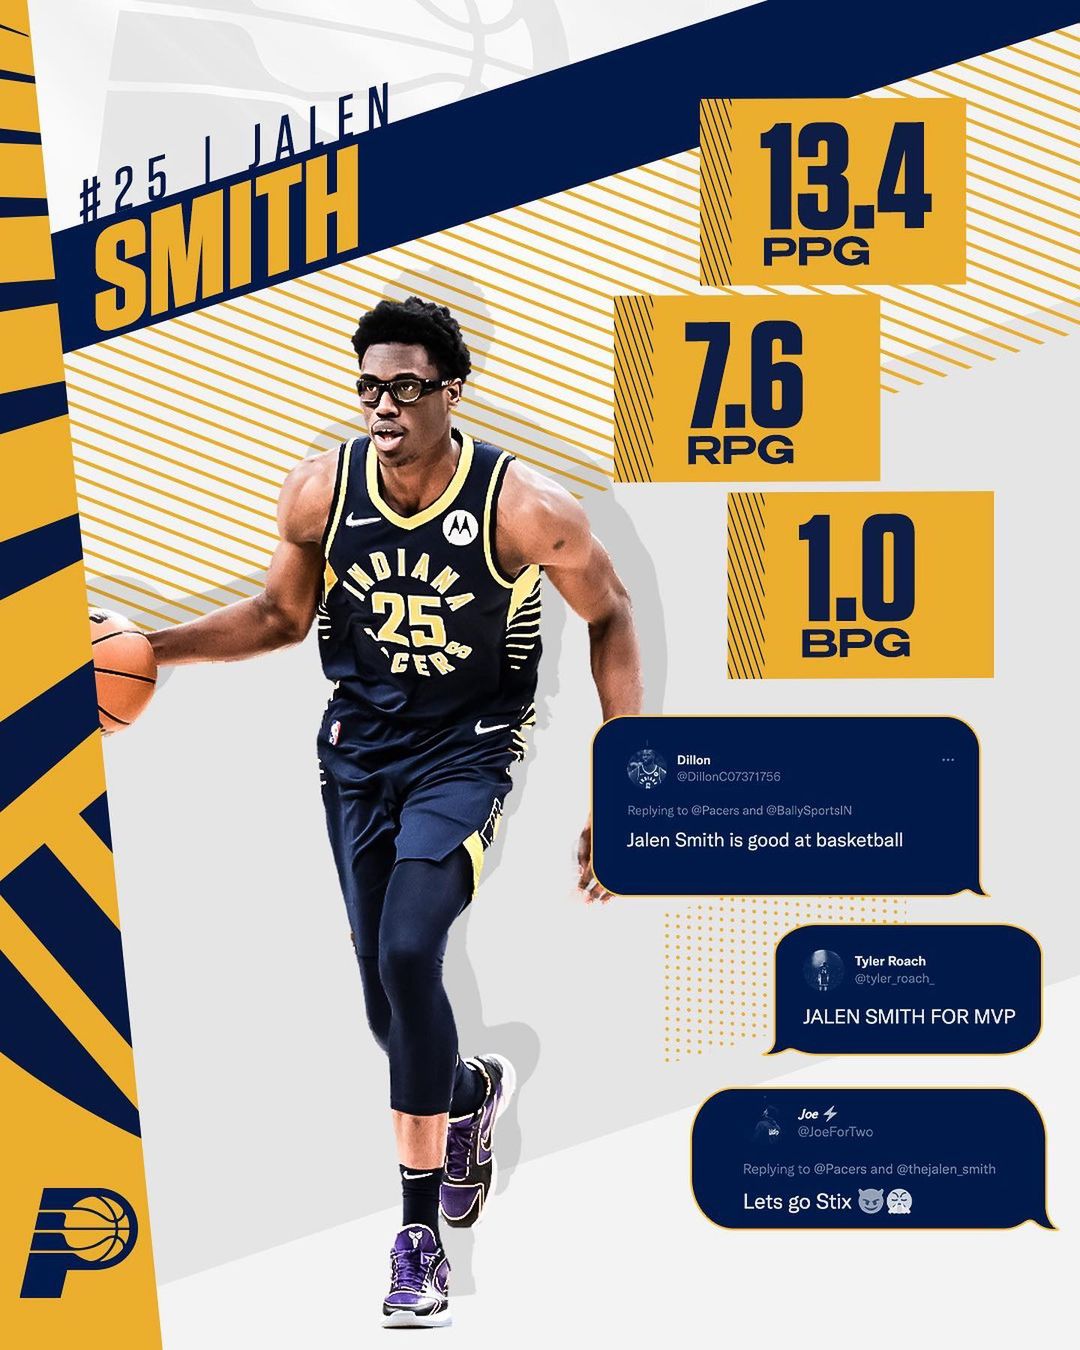 Making an instant impact after joining the Pacers at the trade deadline, @thejal...